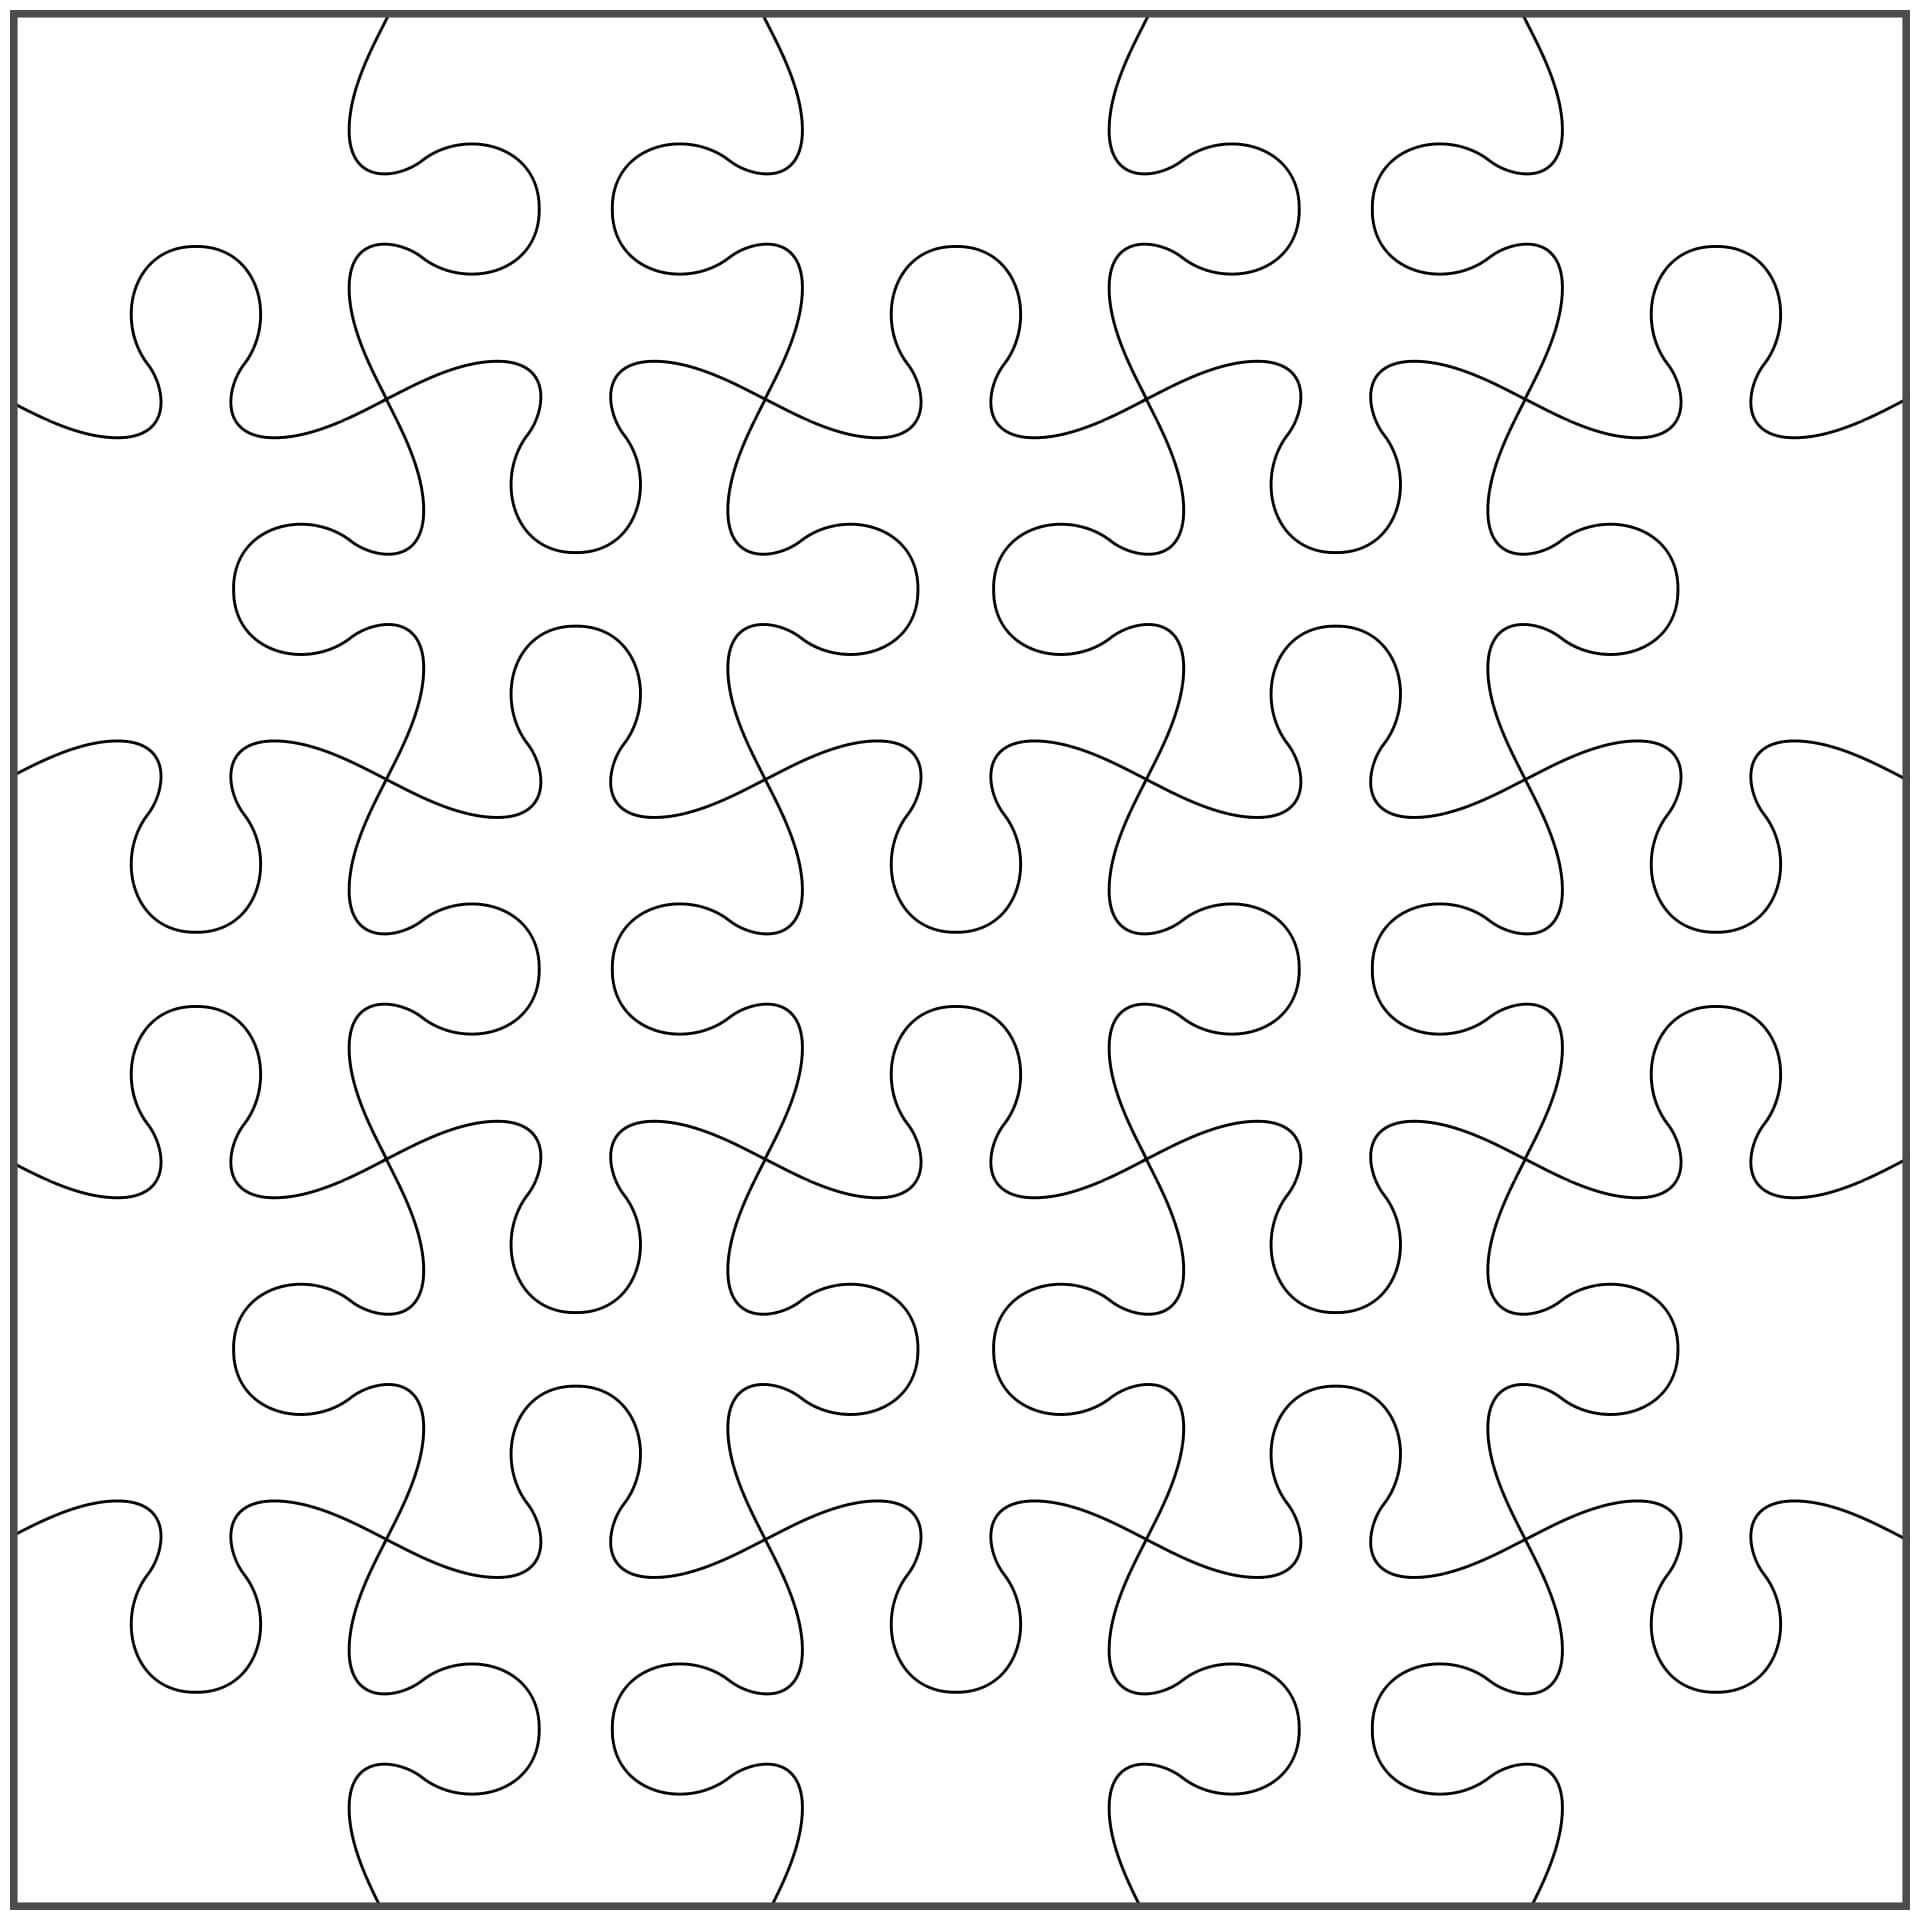 Printable 9 Piece Jigsaw Puzzle Template_36201